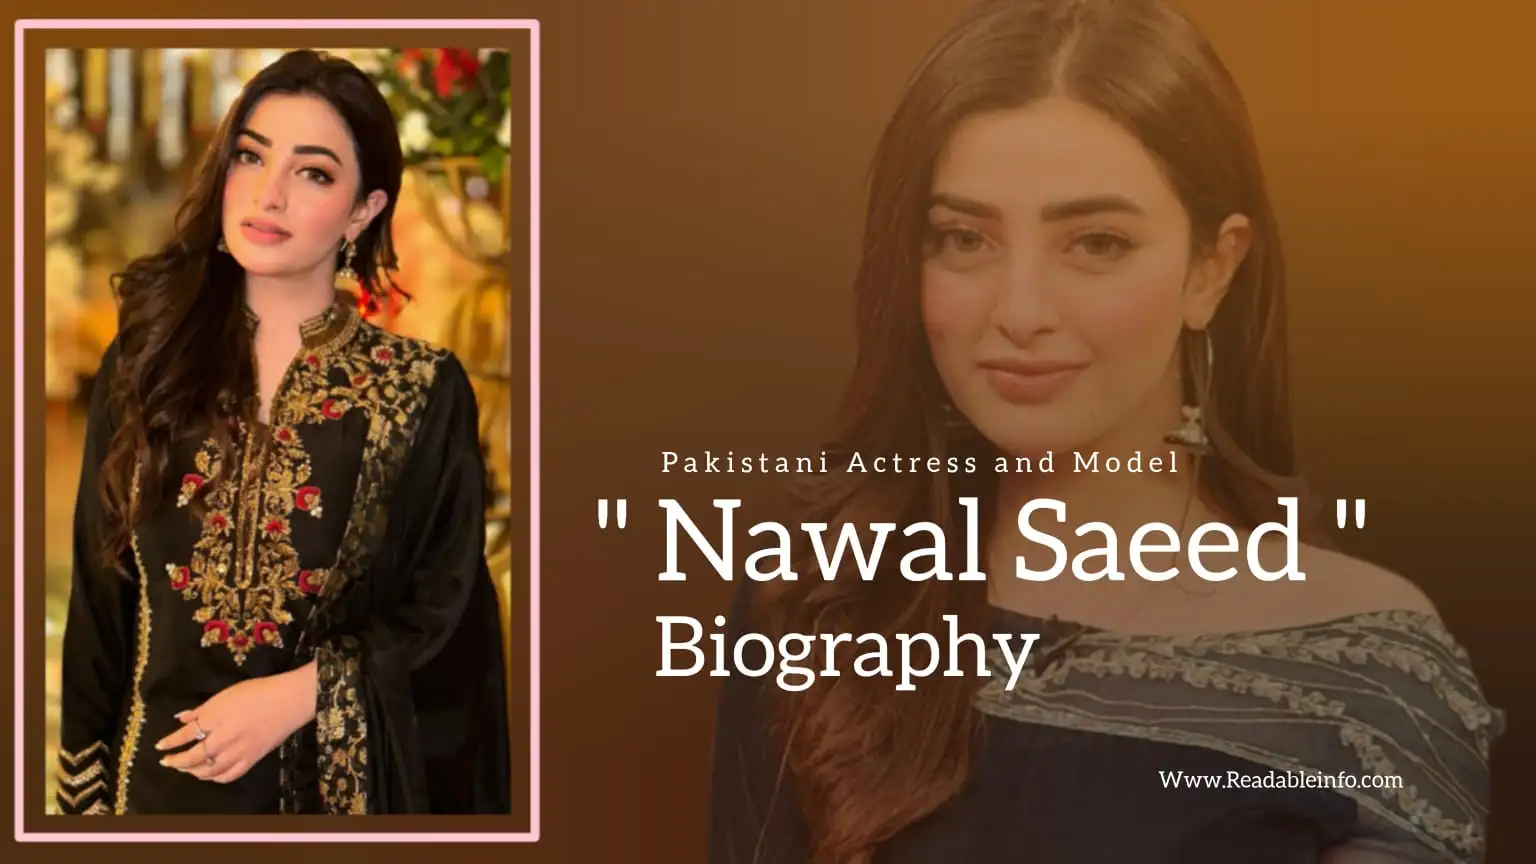 You are currently viewing Nawal Saeed Biography (Pakistani Actress and Model)